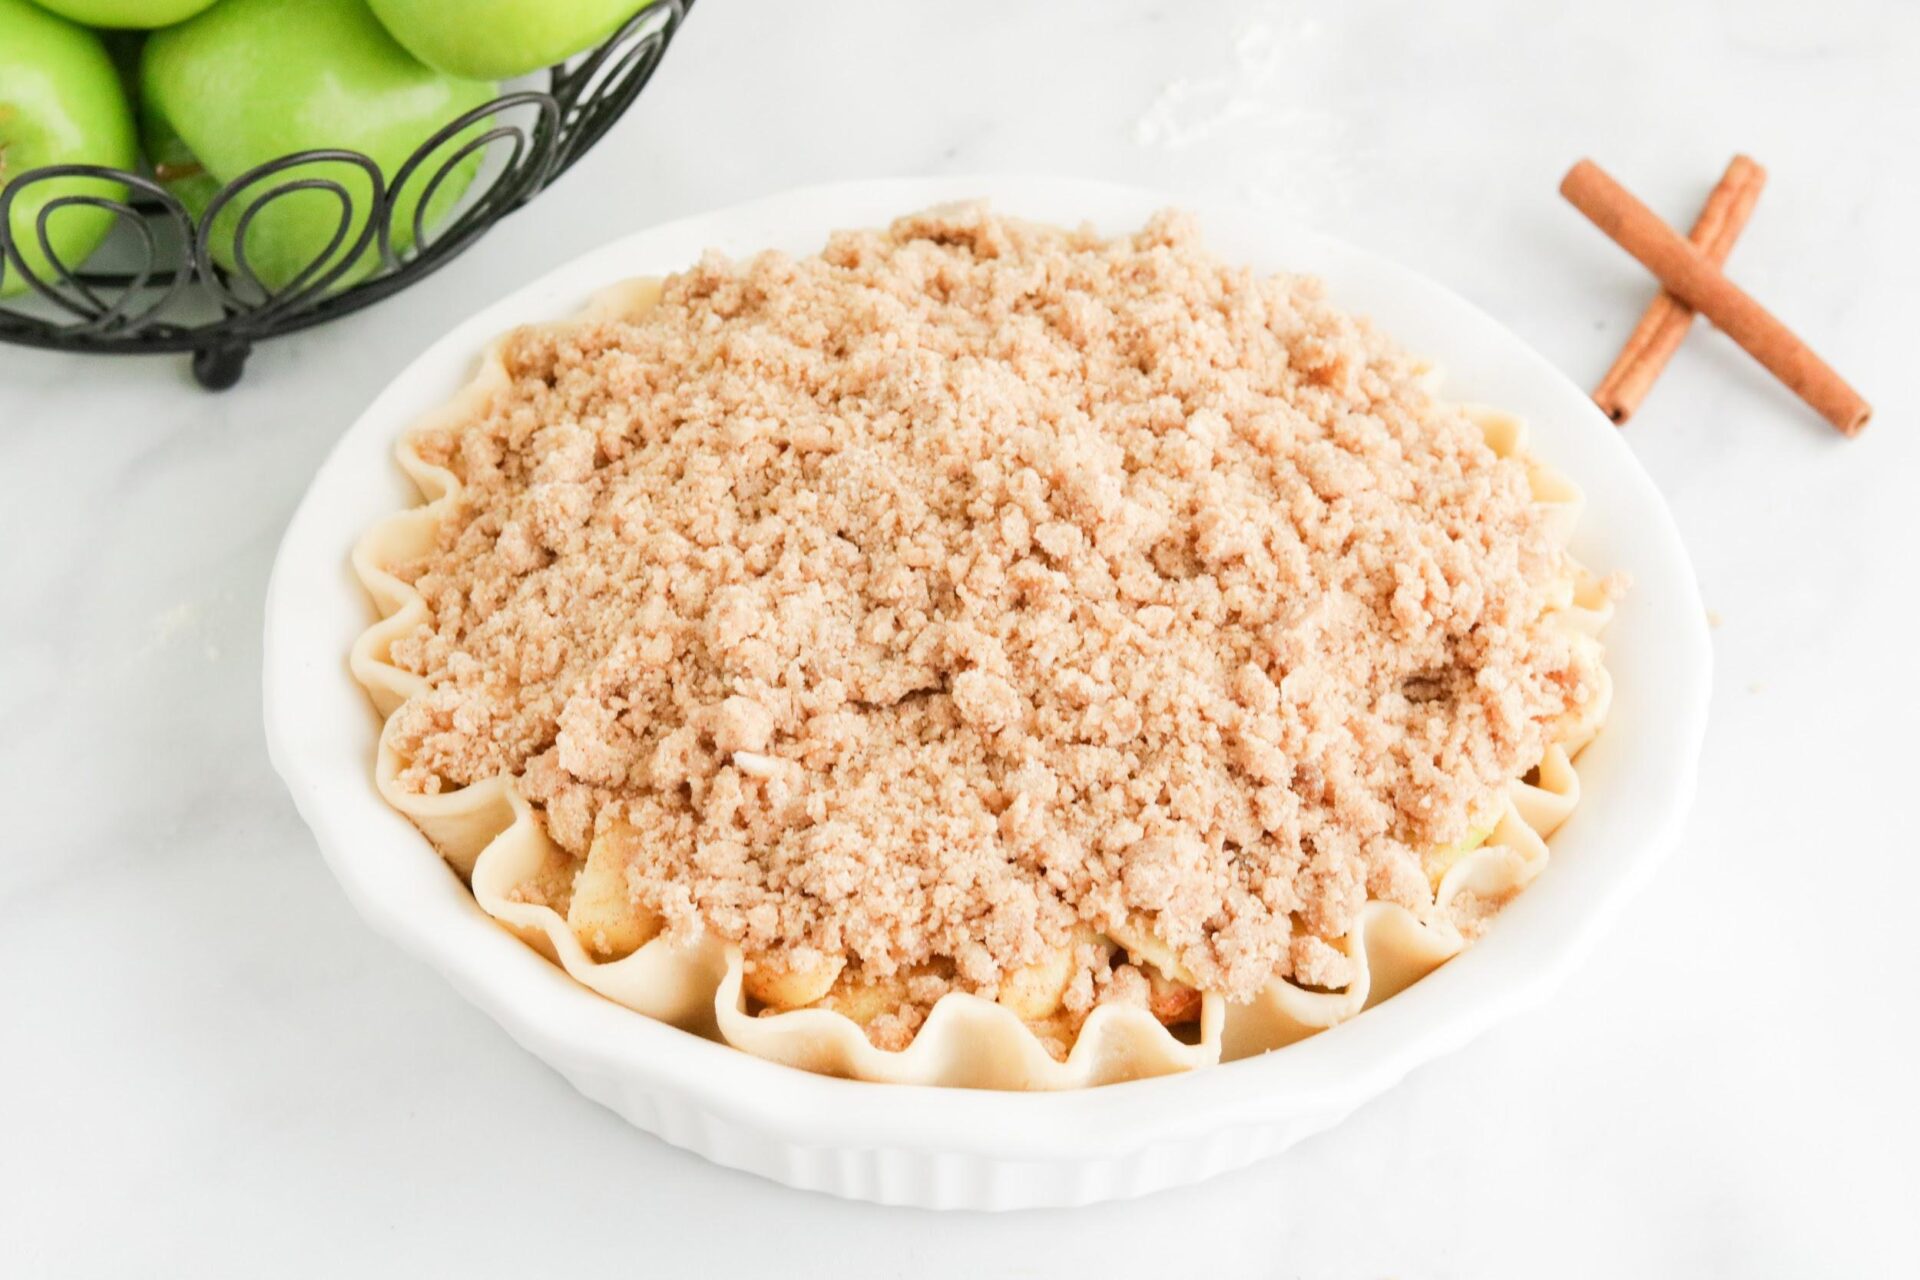 Apple crumble pie is quickly becoming one of my favorite apple pie recipes. It is so simple and easy to make and is a crowd favorite! 